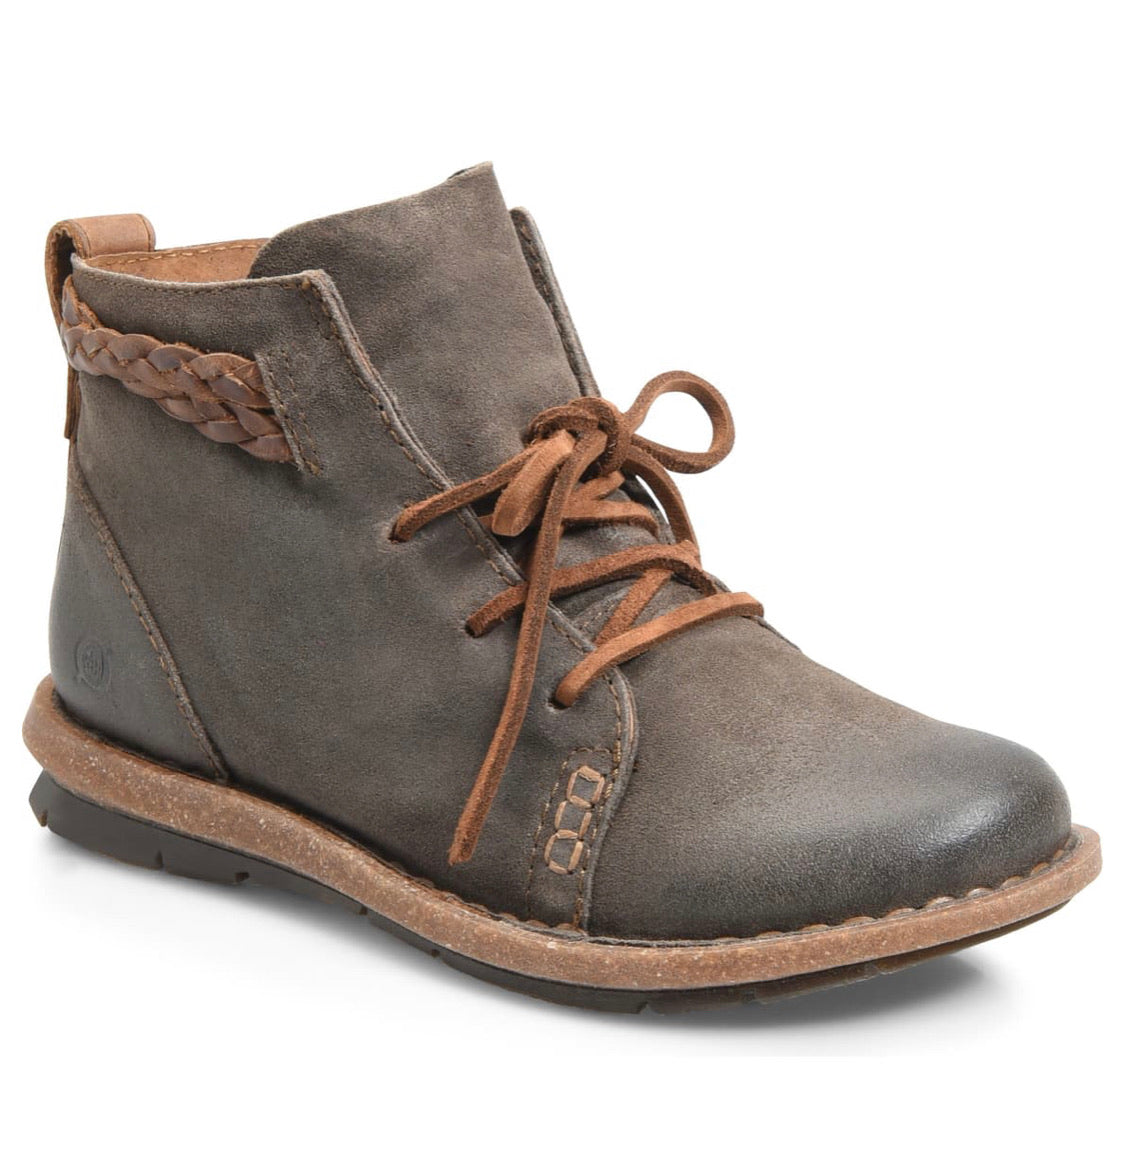 Born Temple Bootie Women’s “Taupe Distressed Leather” | All Mixed Up